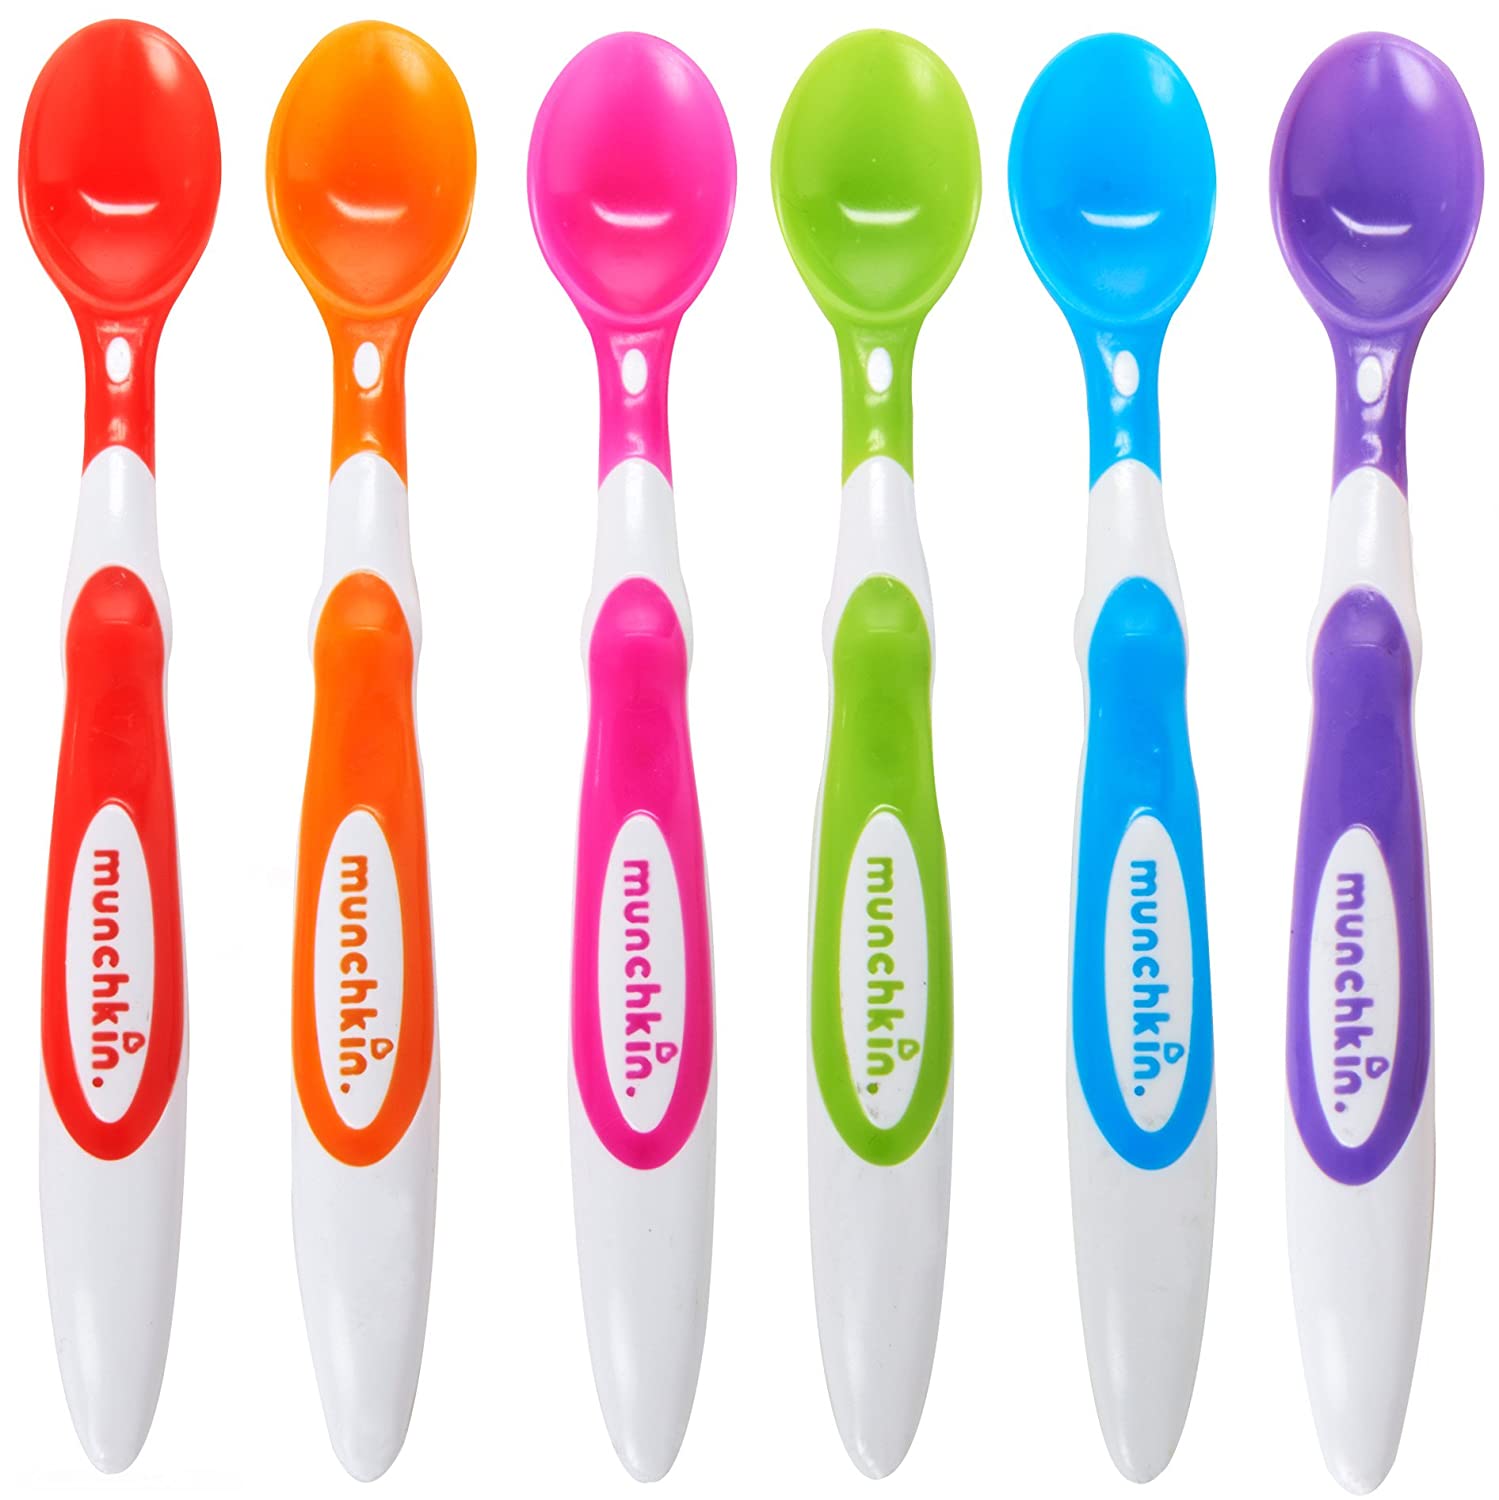 Top 9 Best Baby Spoons for Self Feeding Reviews in 2023 2